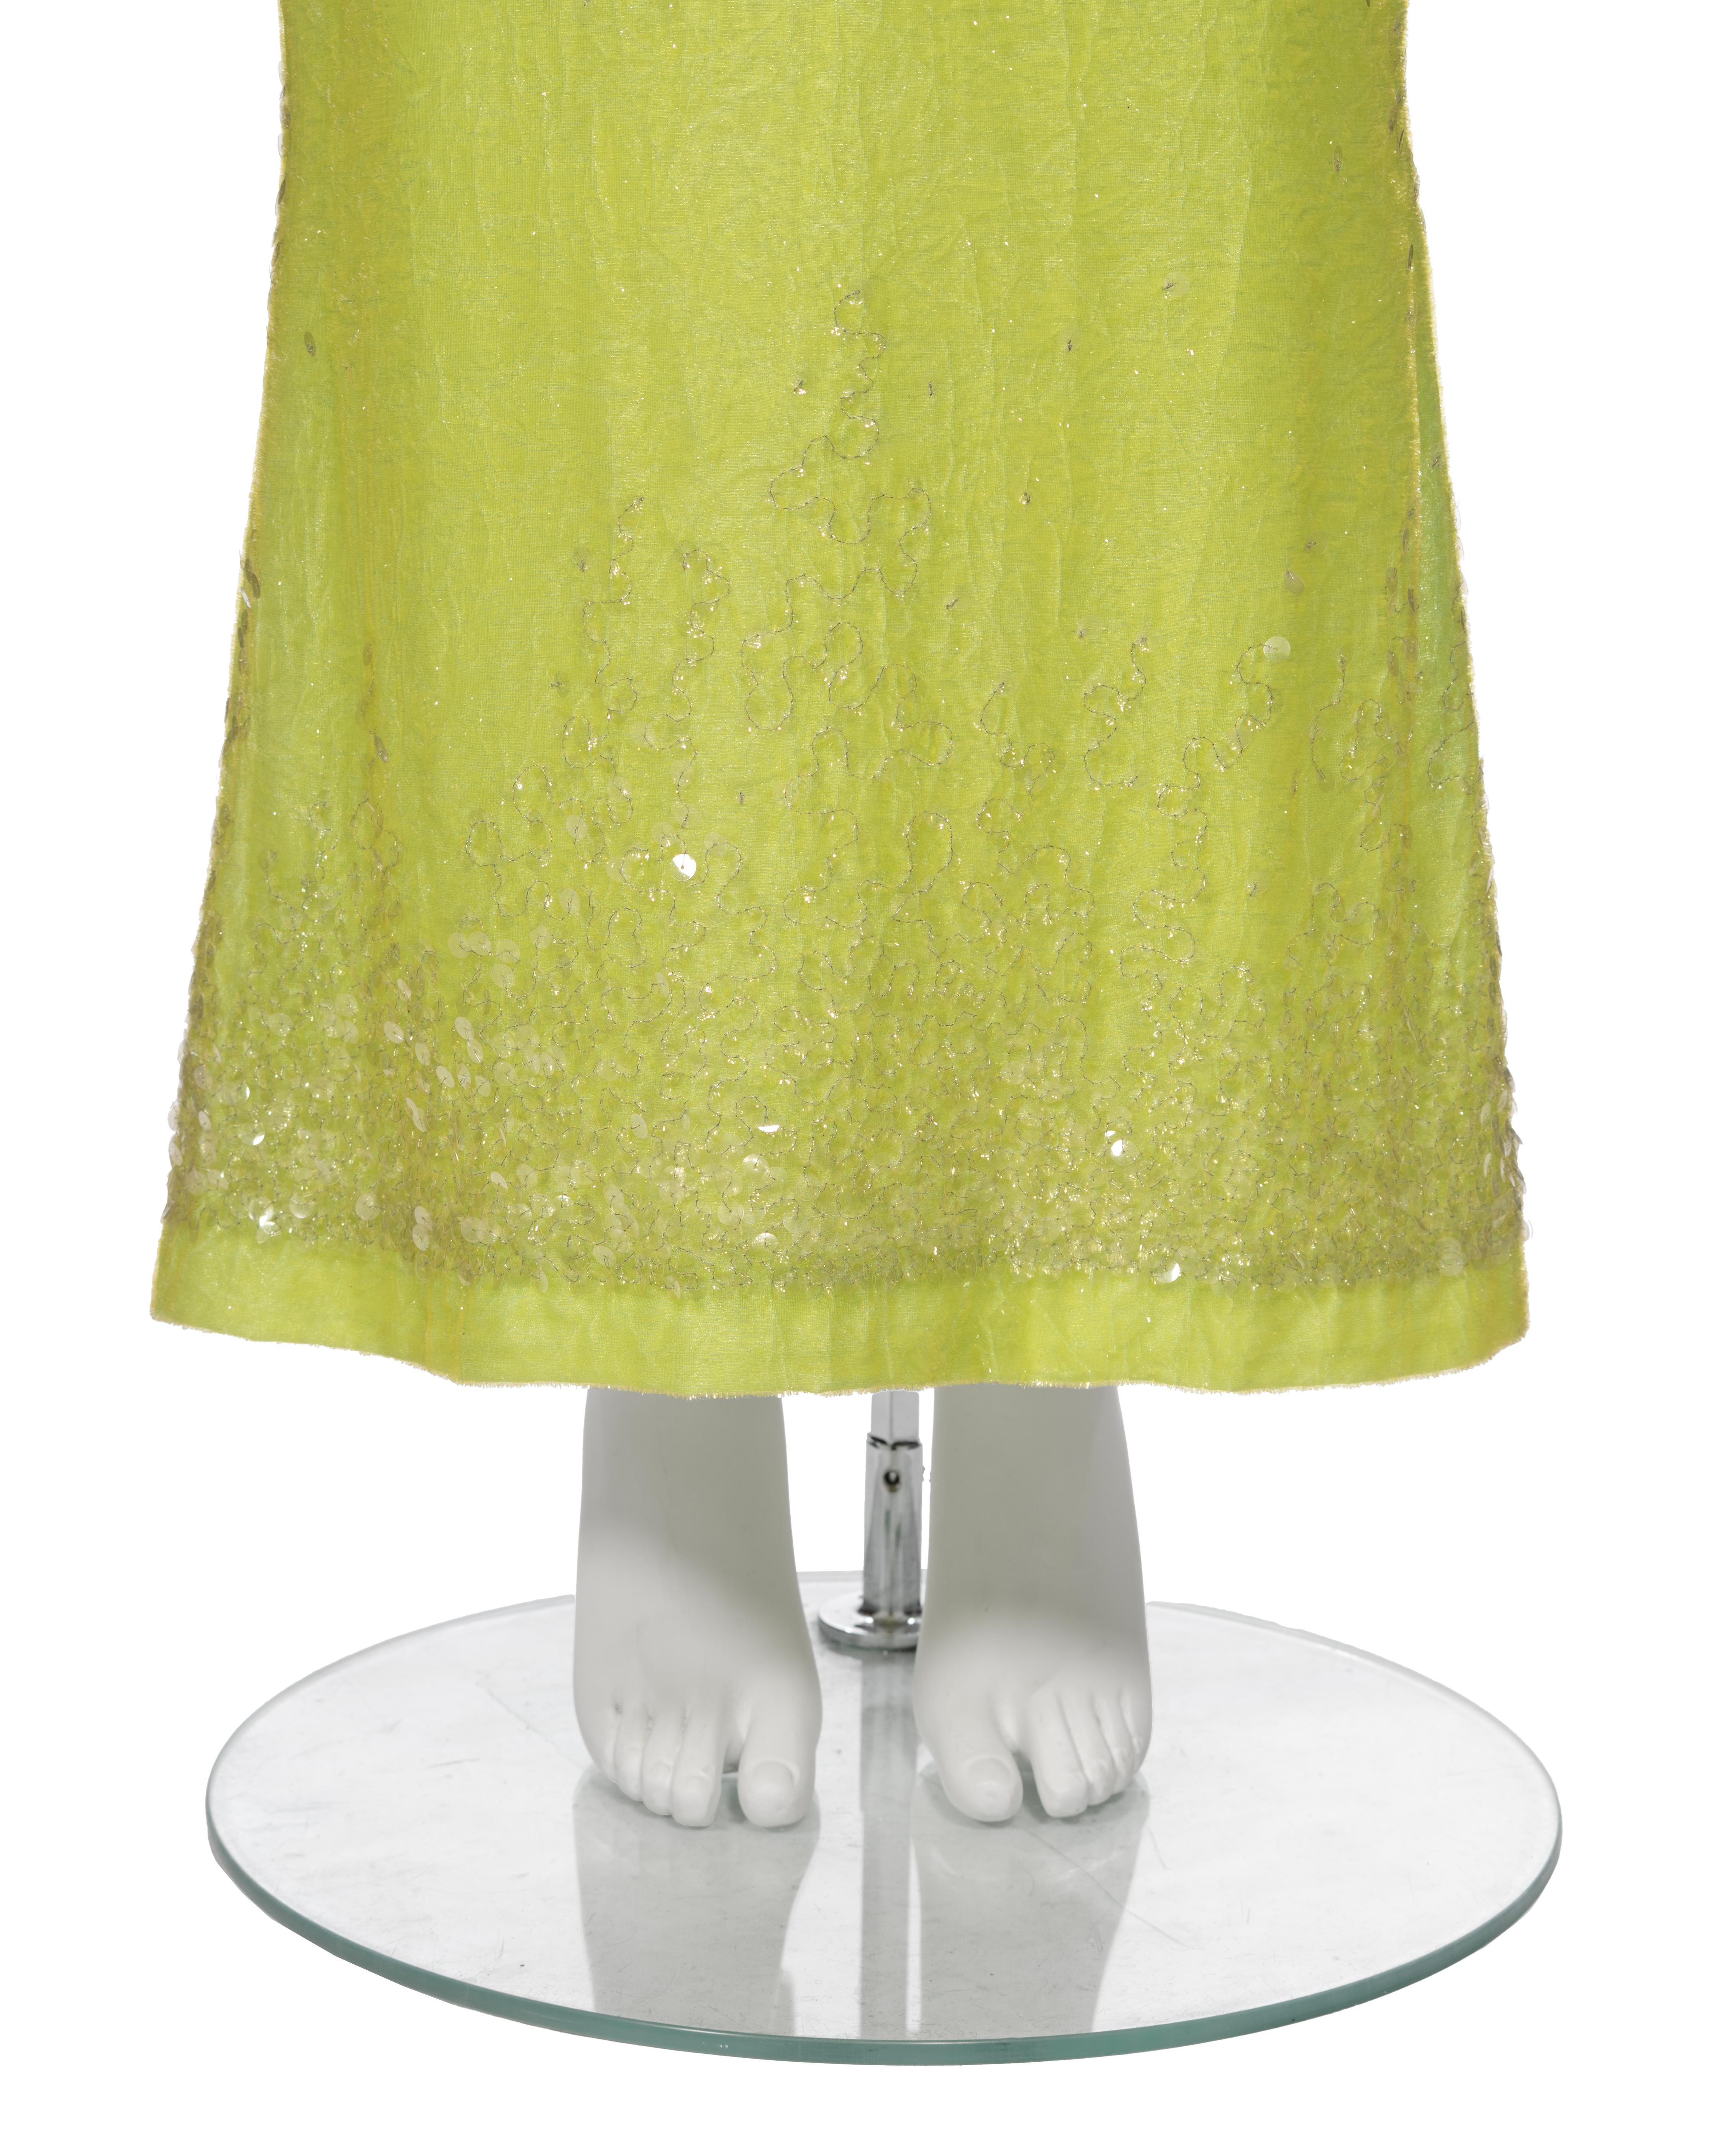 Chanel by Karl Lagerfeld Embellished Lime Green Velvet Dress and Jacket, ss 1997 For Sale 2